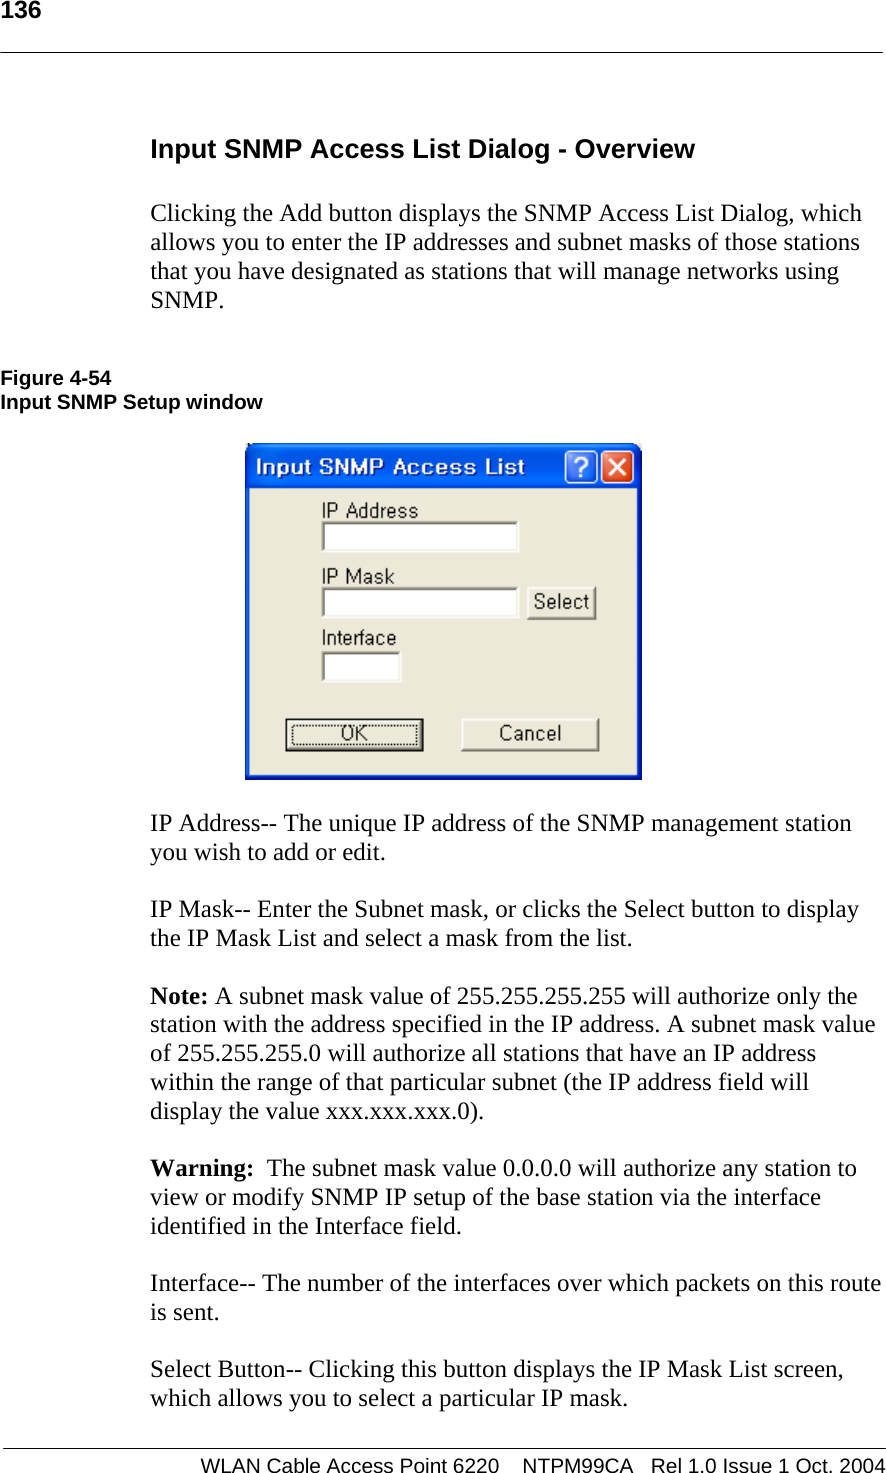   136   Input SNMP Access List Dialog - Overview  Clicking the Add button displays the SNMP Access List Dialog, which allows you to enter the IP addresses and subnet masks of those stations that you have designated as stations that will manage networks using SNMP.   Figure 4-54 Input SNMP Setup window    IP Address-- The unique IP address of the SNMP management station you wish to add or edit.  IP Mask-- Enter the Subnet mask, or clicks the Select button to display the IP Mask List and select a mask from the list.  Note: A subnet mask value of 255.255.255.255 will authorize only the station with the address specified in the IP address. A subnet mask value of 255.255.255.0 will authorize all stations that have an IP address within the range of that particular subnet (the IP address field will display the value xxx.xxx.xxx.0).   Warning:  The subnet mask value 0.0.0.0 will authorize any station to view or modify SNMP IP setup of the base station via the interface identified in the Interface field.  Interface-- The number of the interfaces over which packets on this route is sent.  Select Button-- Clicking this button displays the IP Mask List screen, which allows you to select a particular IP mask. WLAN Cable Access Point 6220    NTPM99CA   Rel 1.0 Issue 1 Oct. 2004